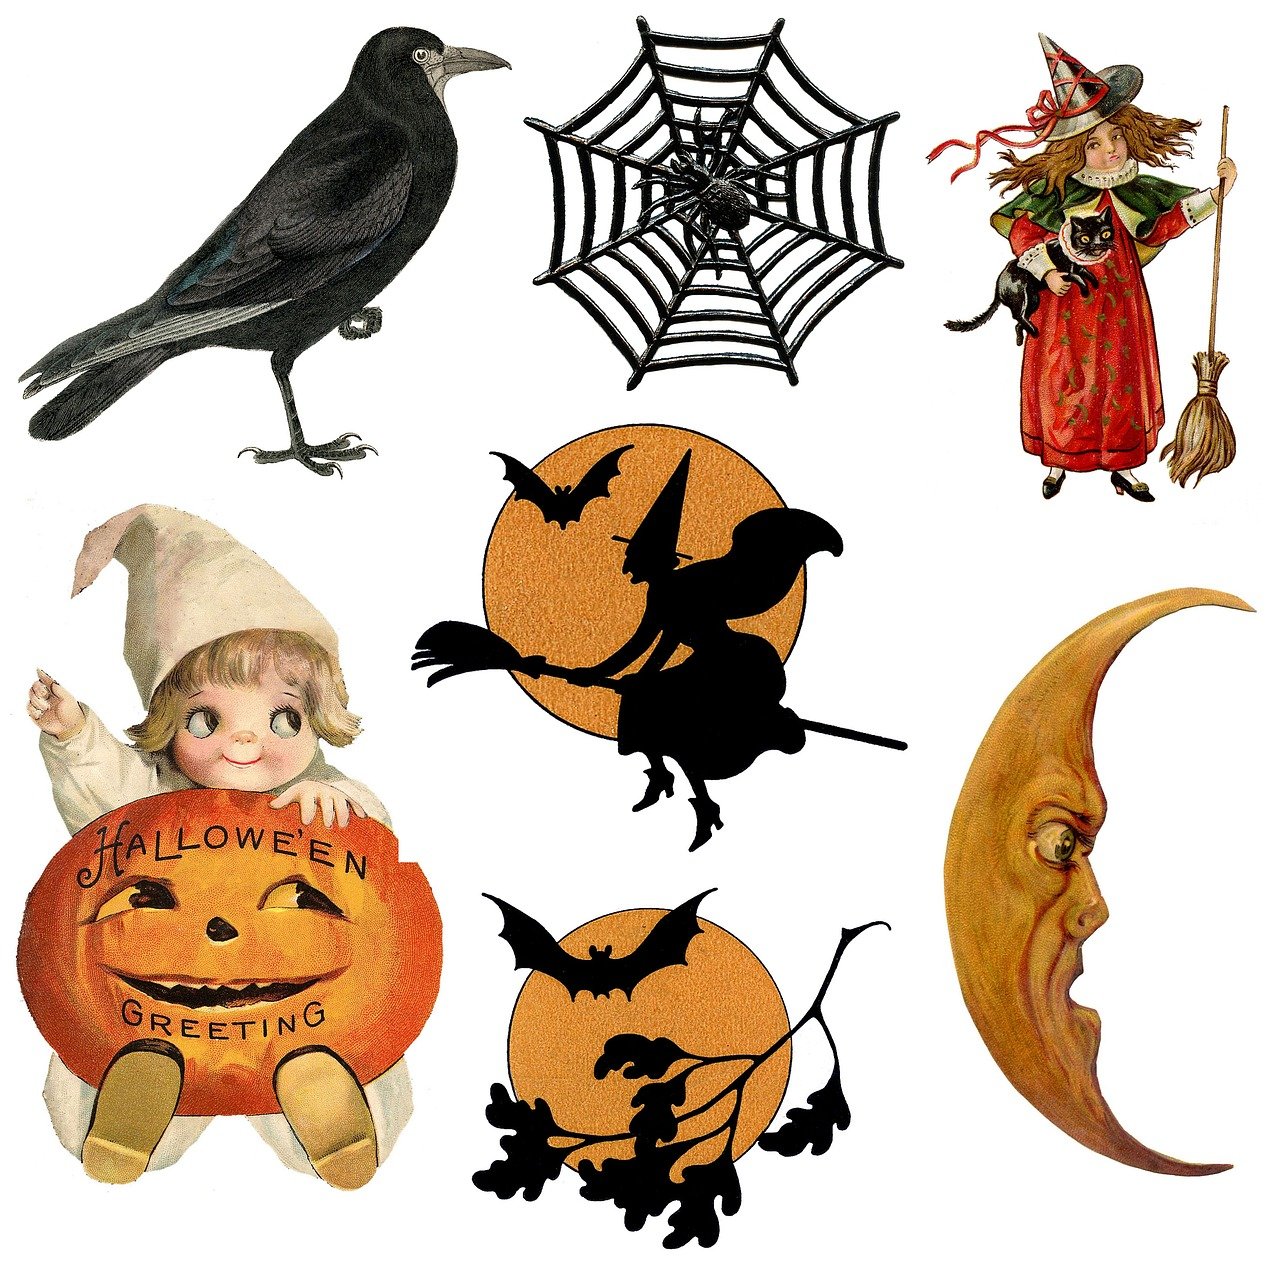 Support Local and Sustainable Businesses - Sustainable and Ethical Choices for Spooky Celebrations